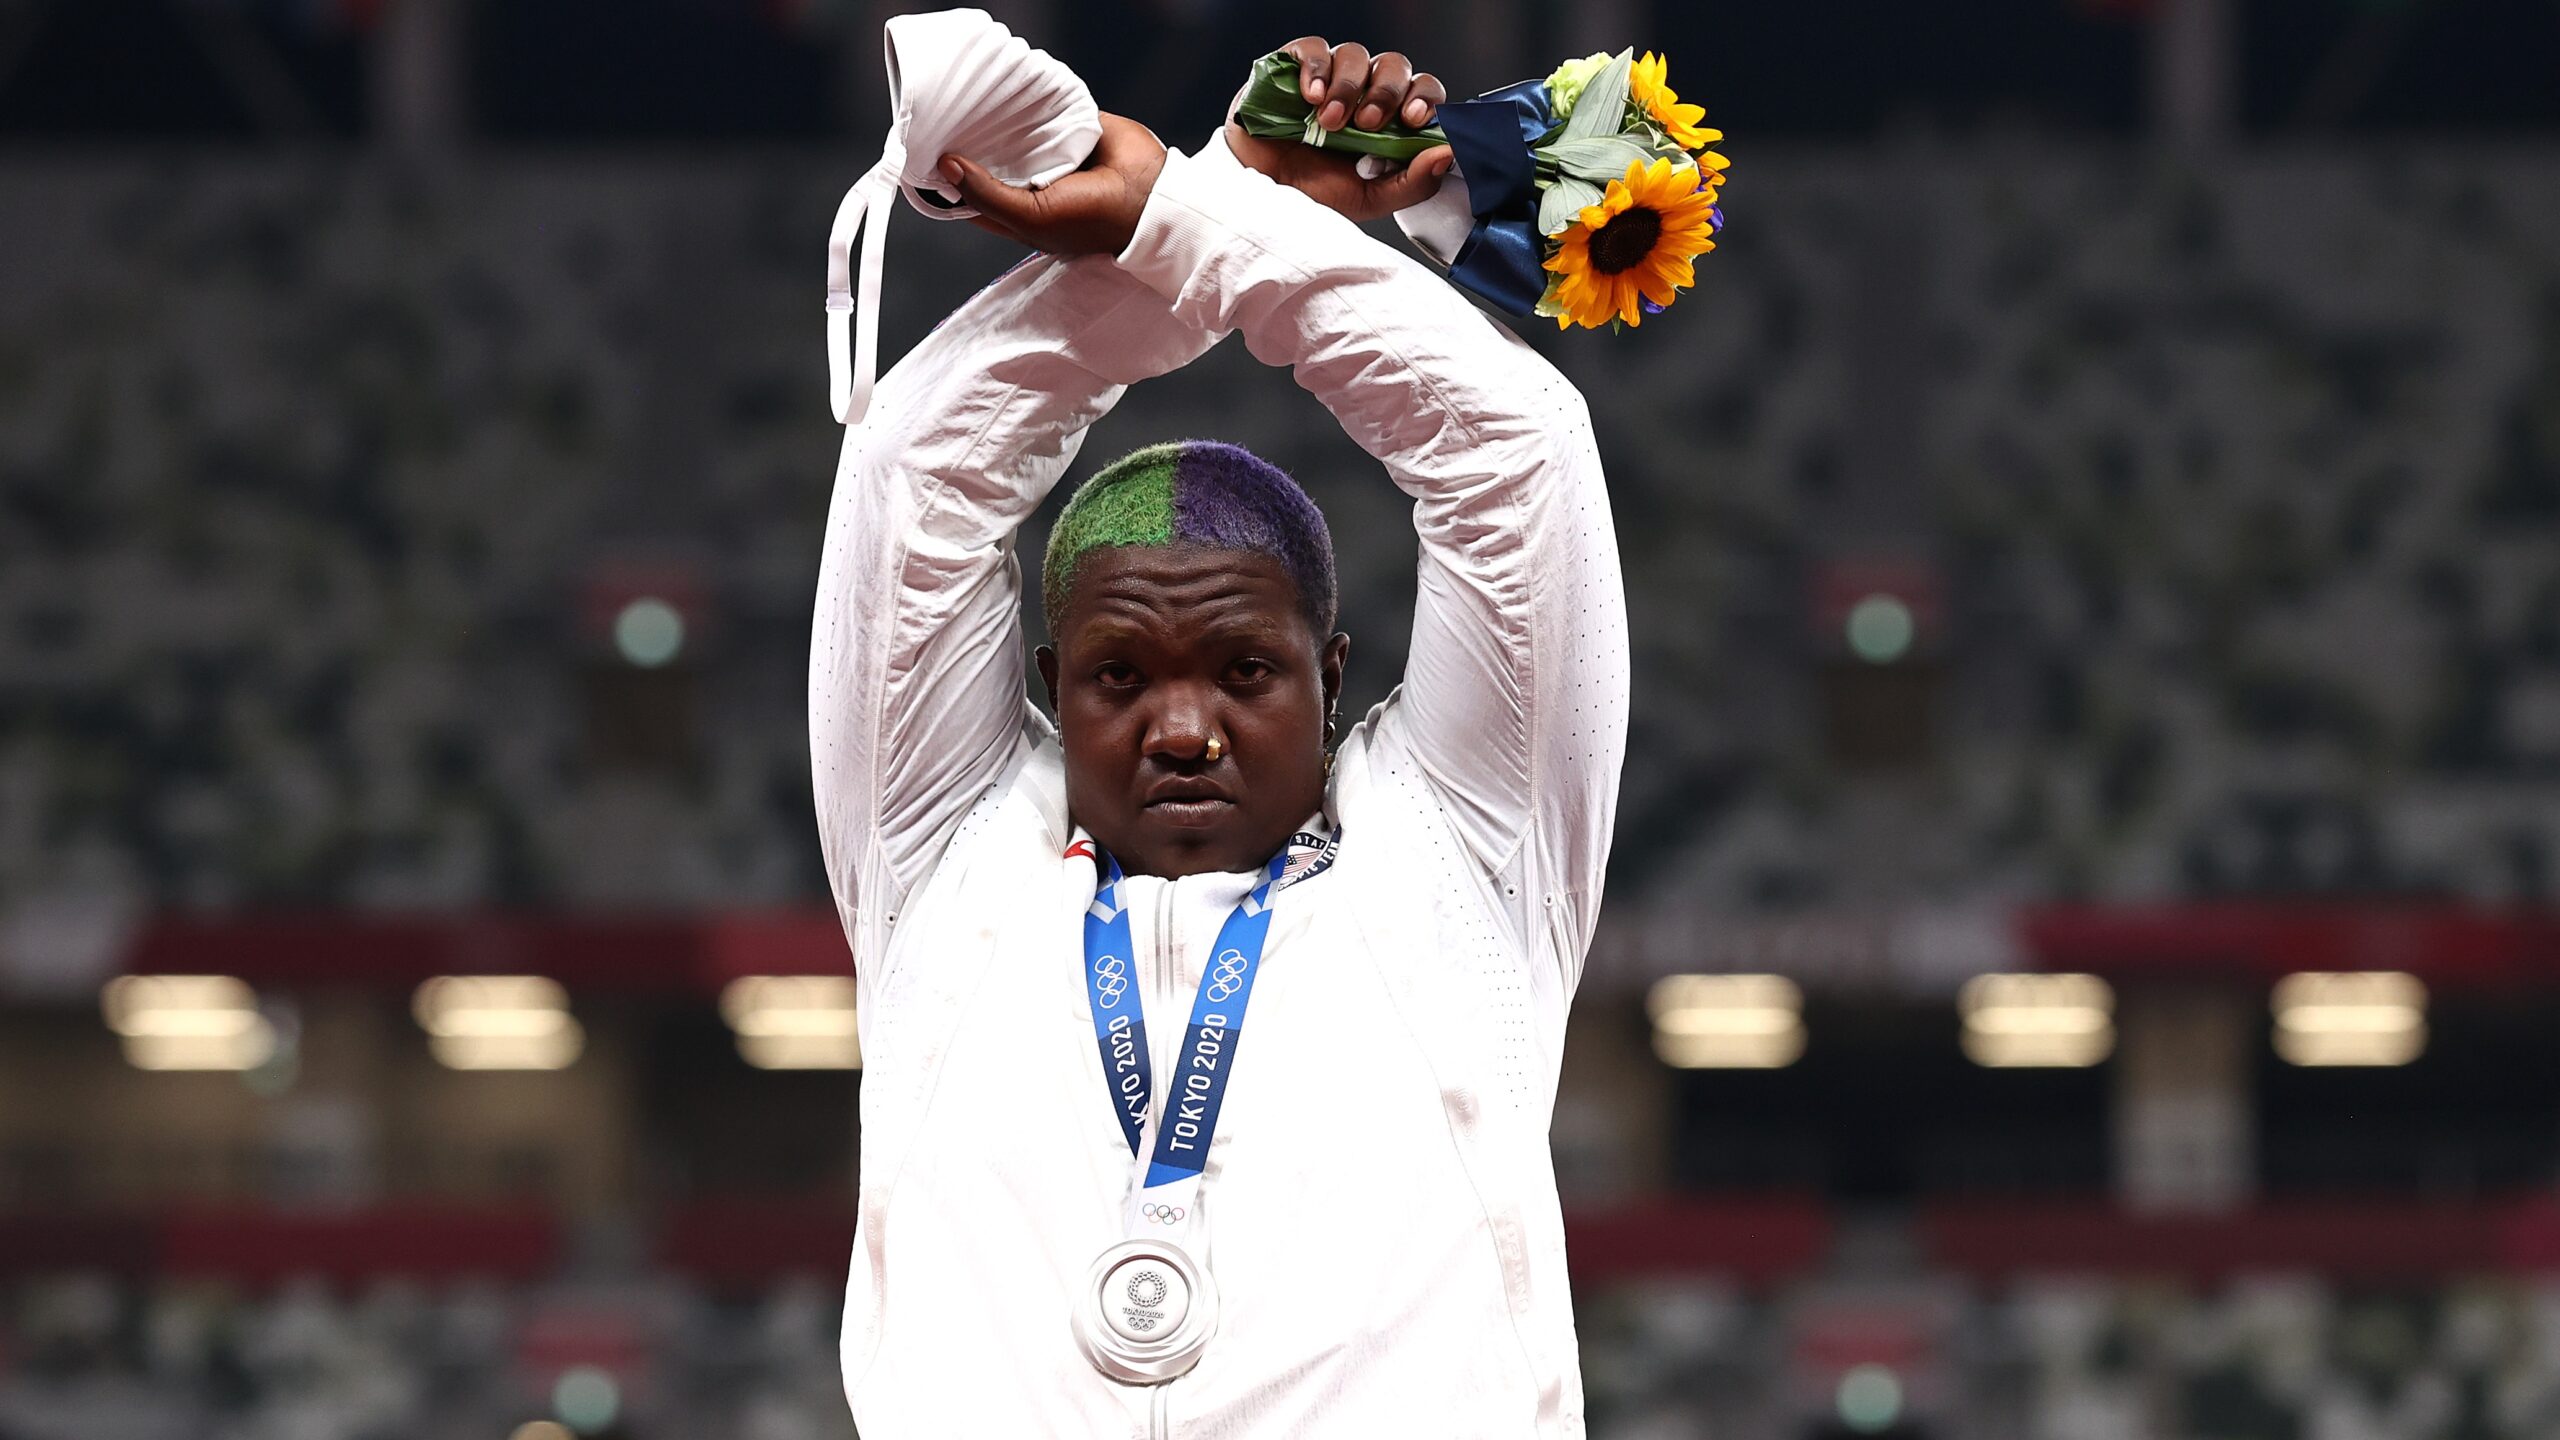 Olympian Raven Saunders Is Being Investigated By The IOC After Making An ‘X’ Gesture On The Podium